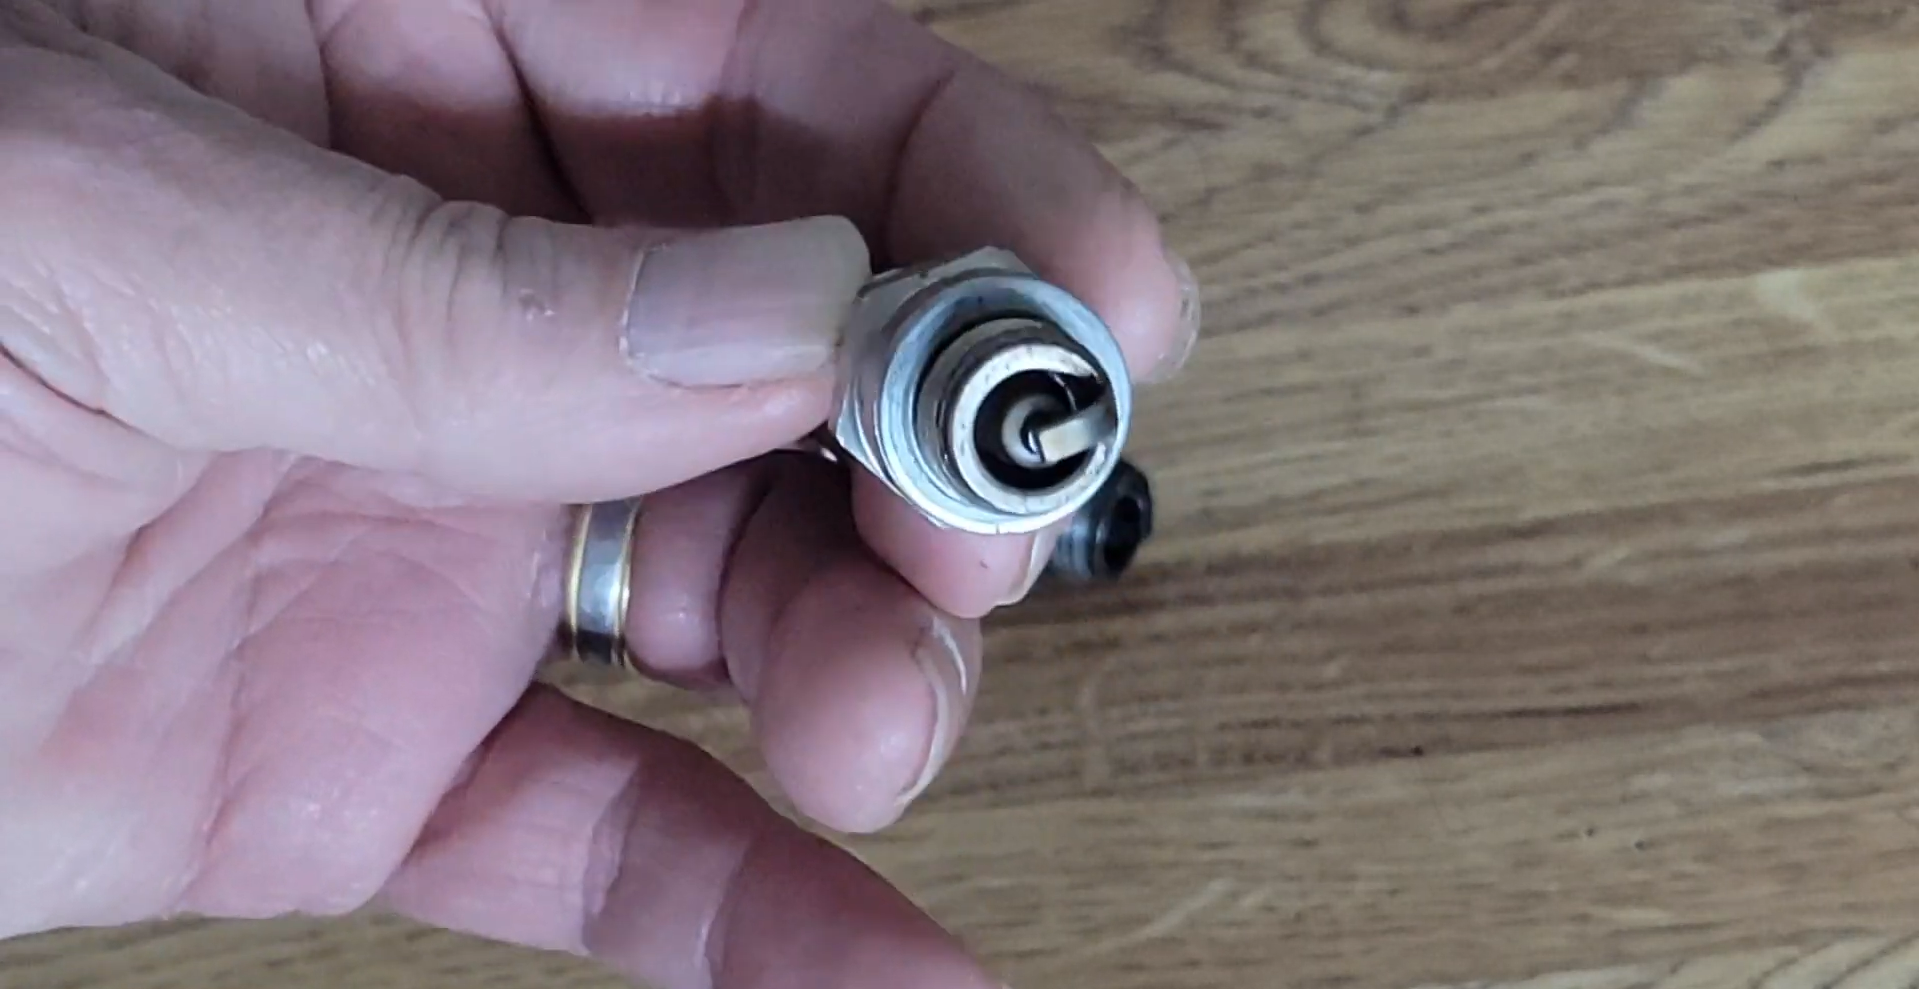 Why Do We Need to Read a Spark Plug?